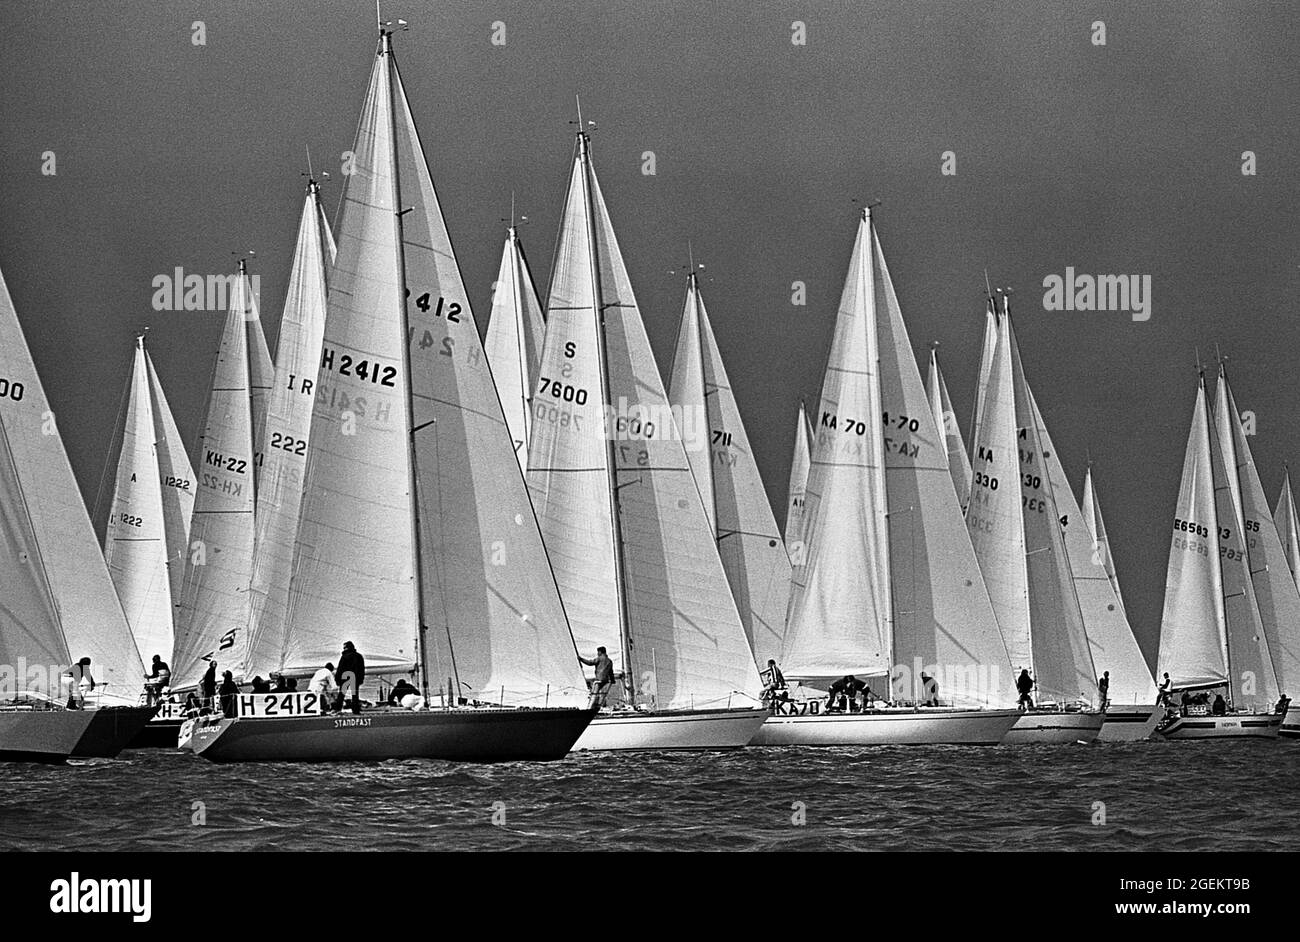 AJANETPHOTO. 1977. SOLENT, ENGLAND. - ADMIRAL'S CUP FLEET - MASSED SAILS AT START OF AN INSHORE RACE.  PHOTO:JONATHAN EASTLAND/AJAX REF:770408 6A 18 Stock Photo